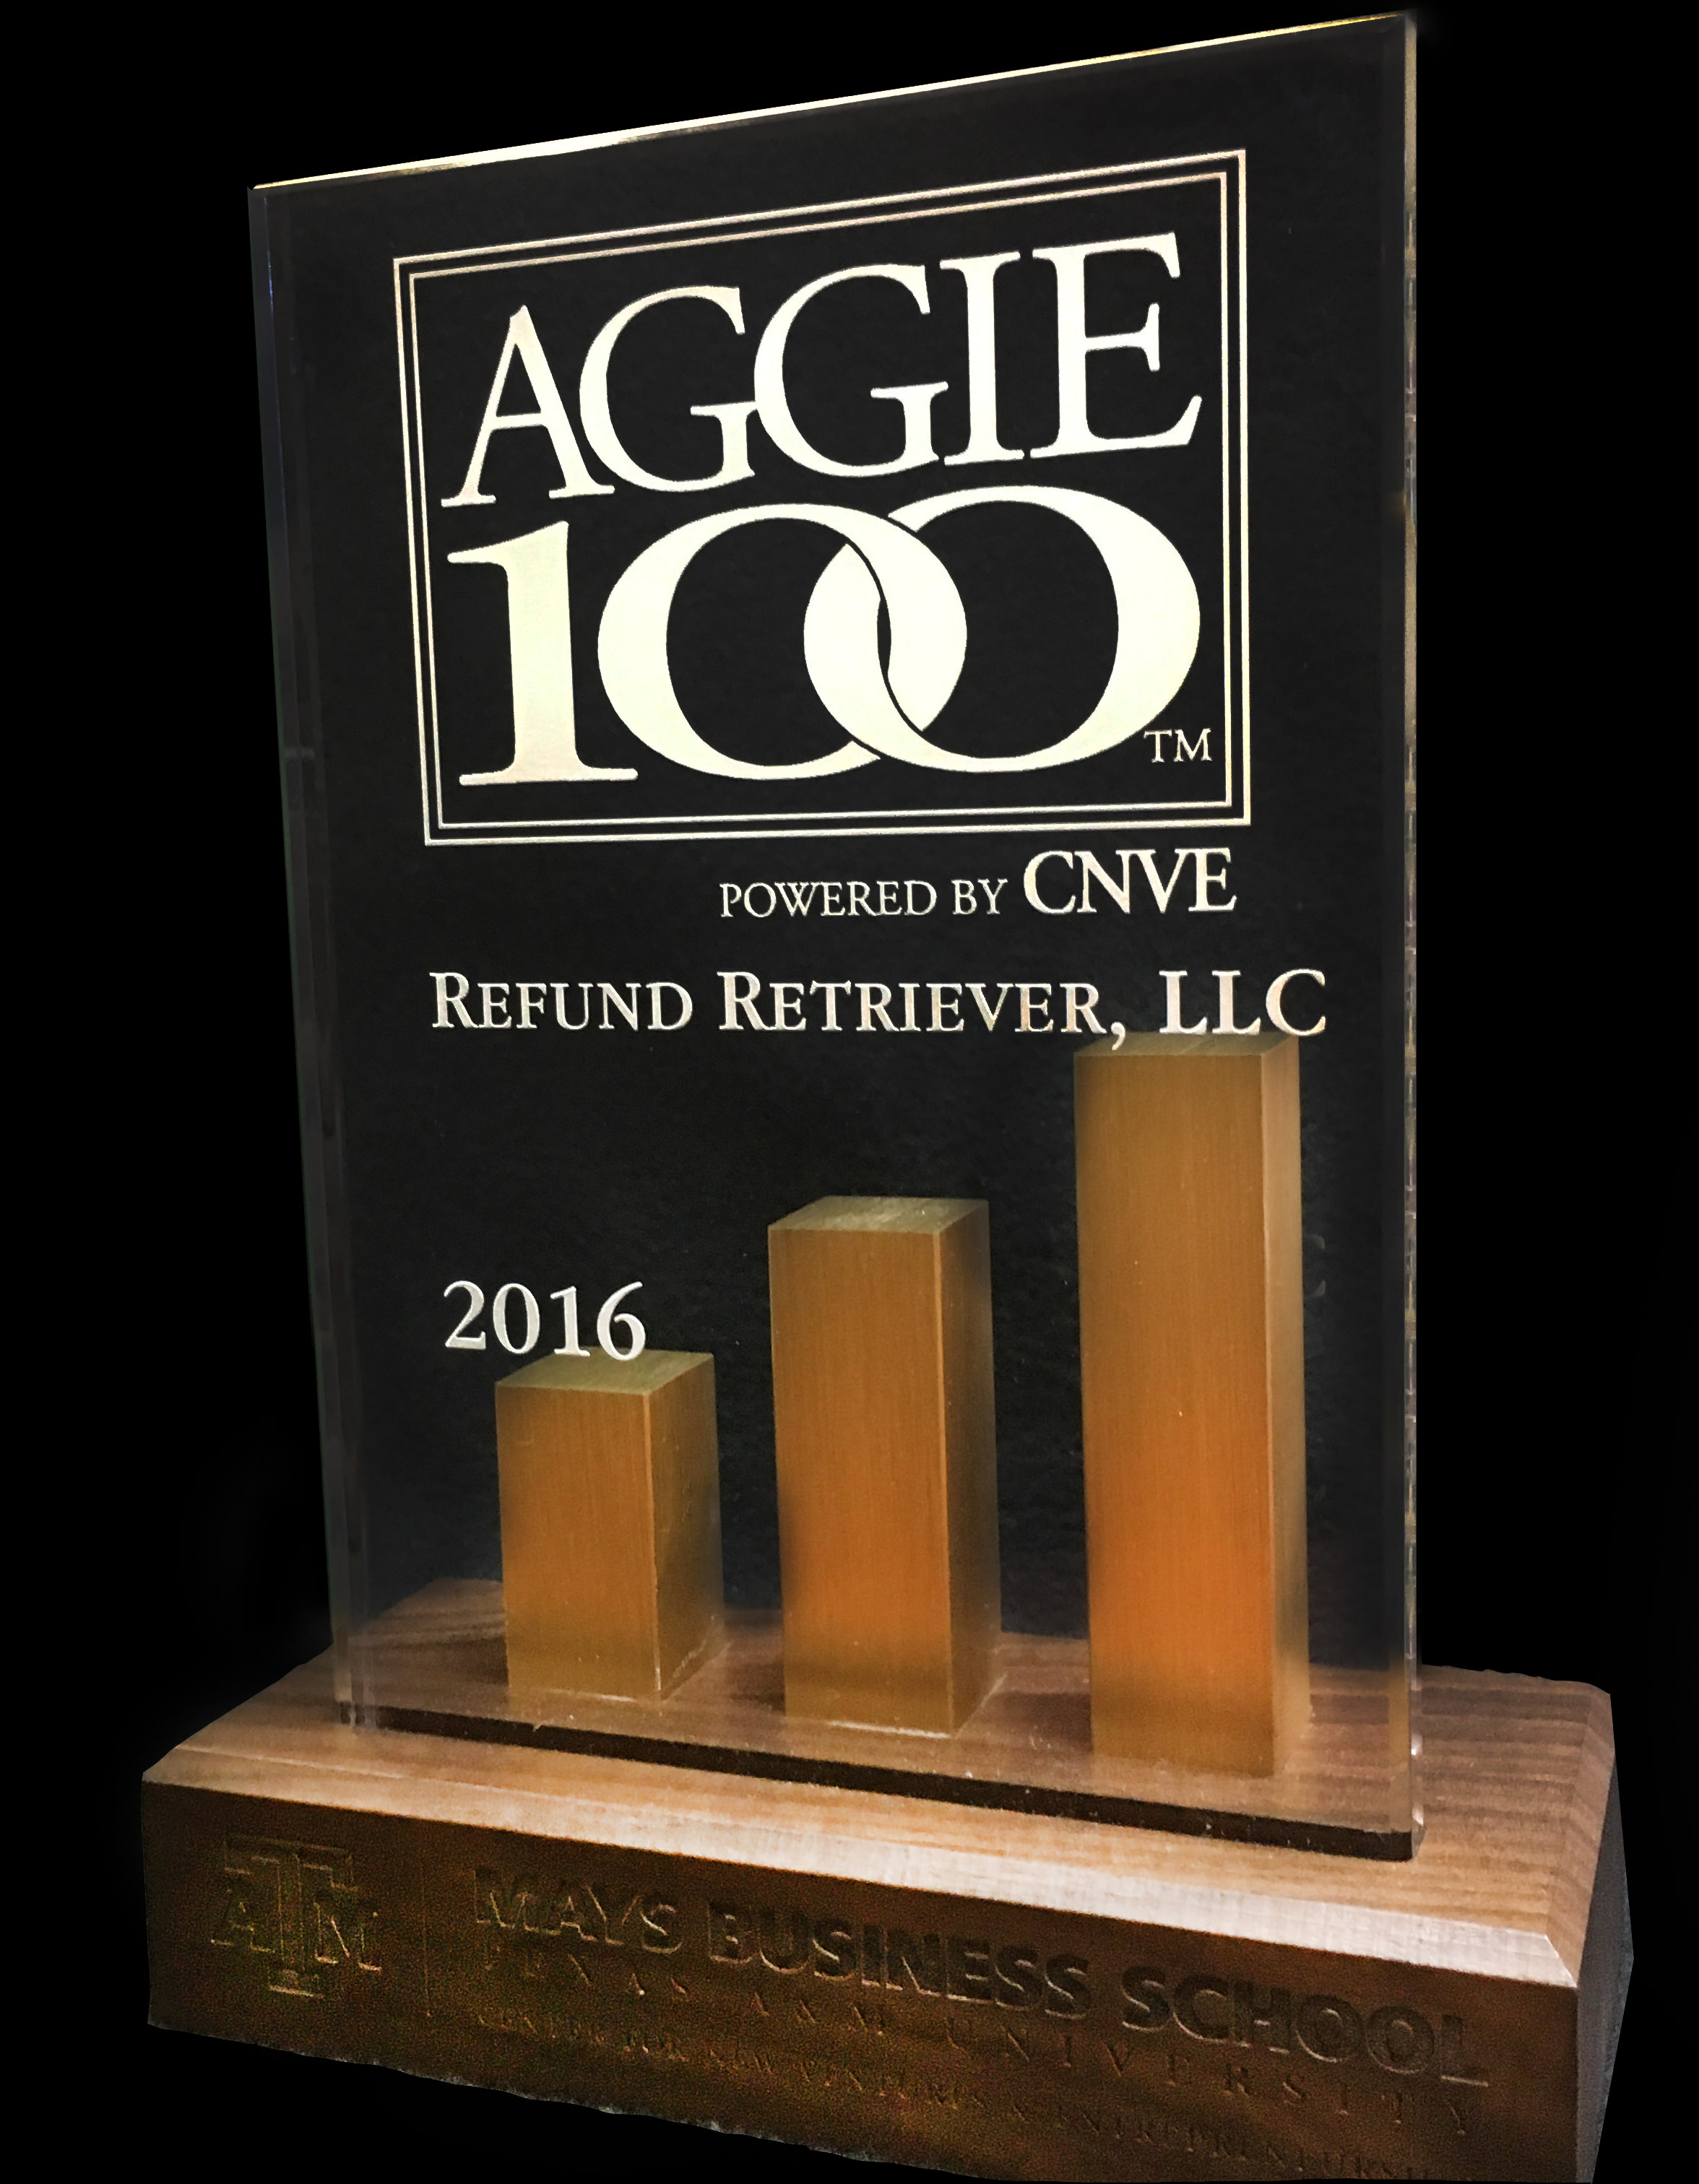 Refund Retriever Honored at the 12th Annual Aggie 100